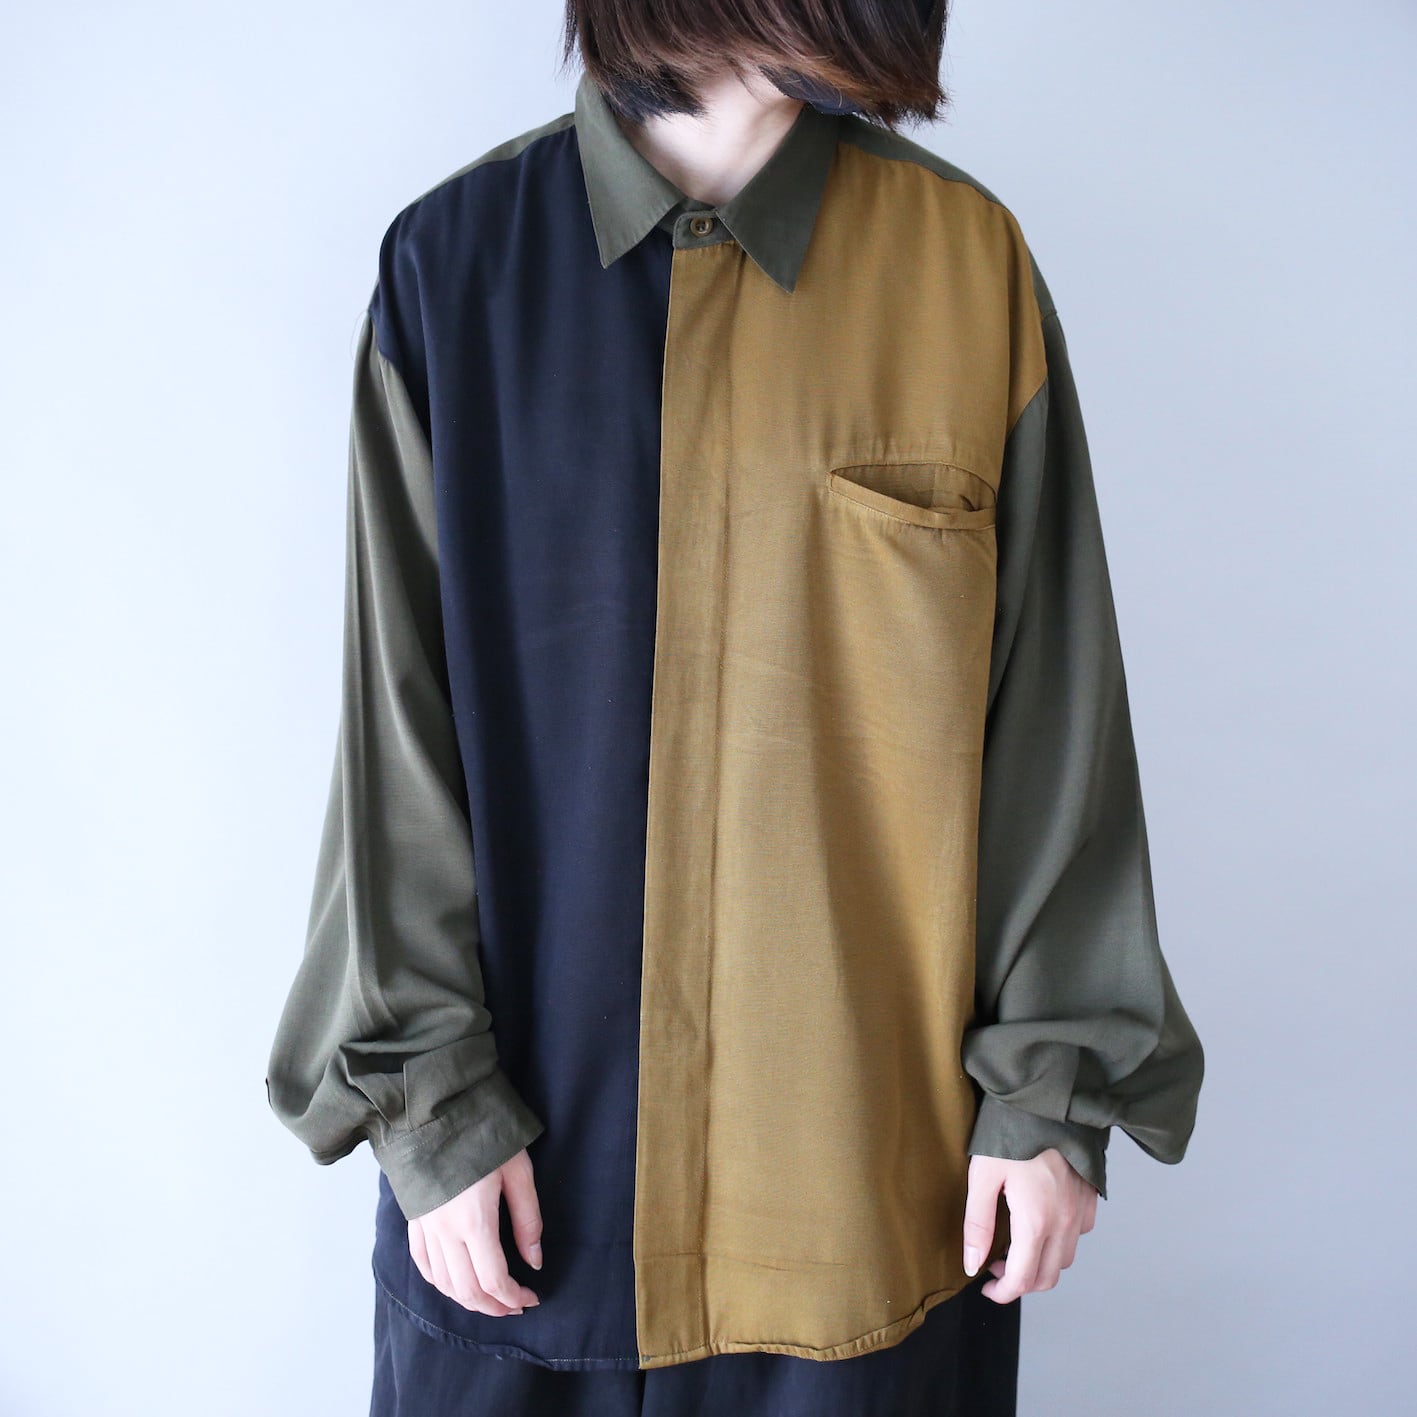 3-tone switching design fry-front loose silhouette shirt